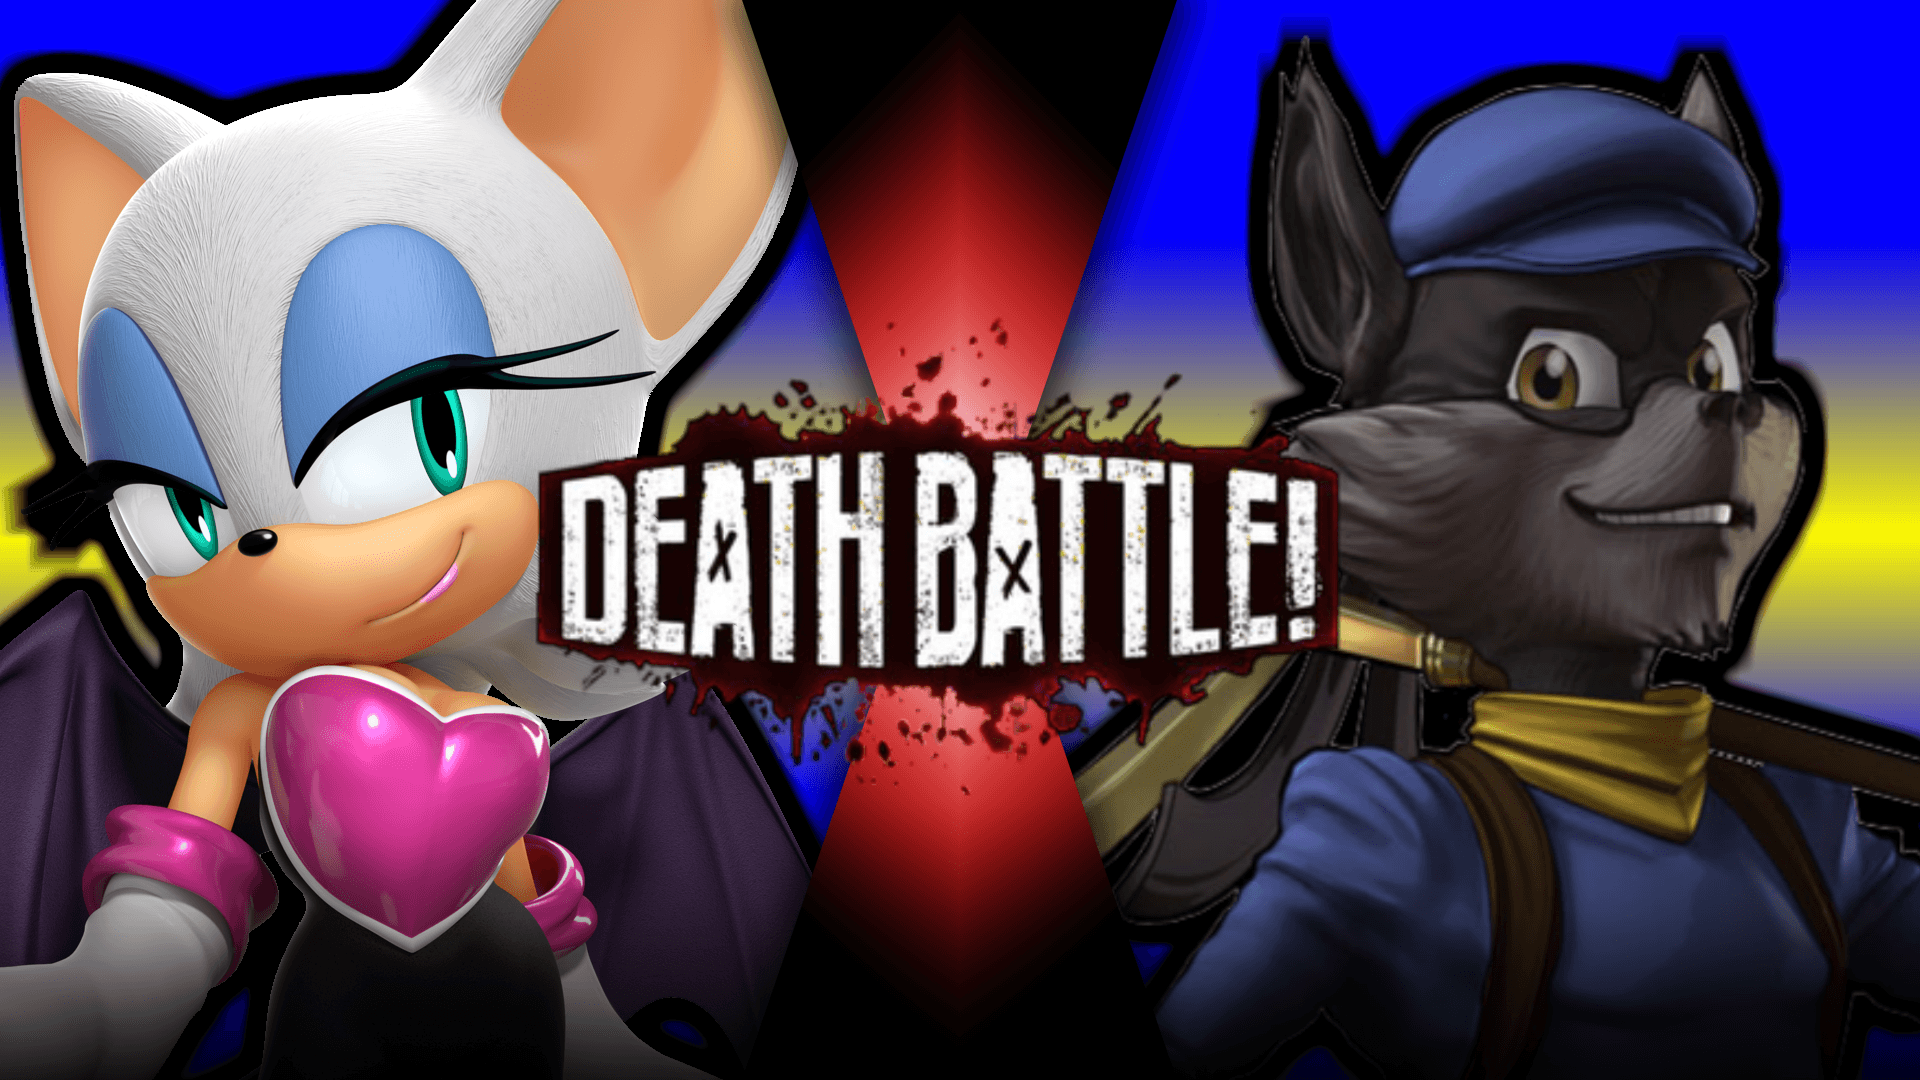 Rouge the Bat VS Sly Cooper Unknown.png